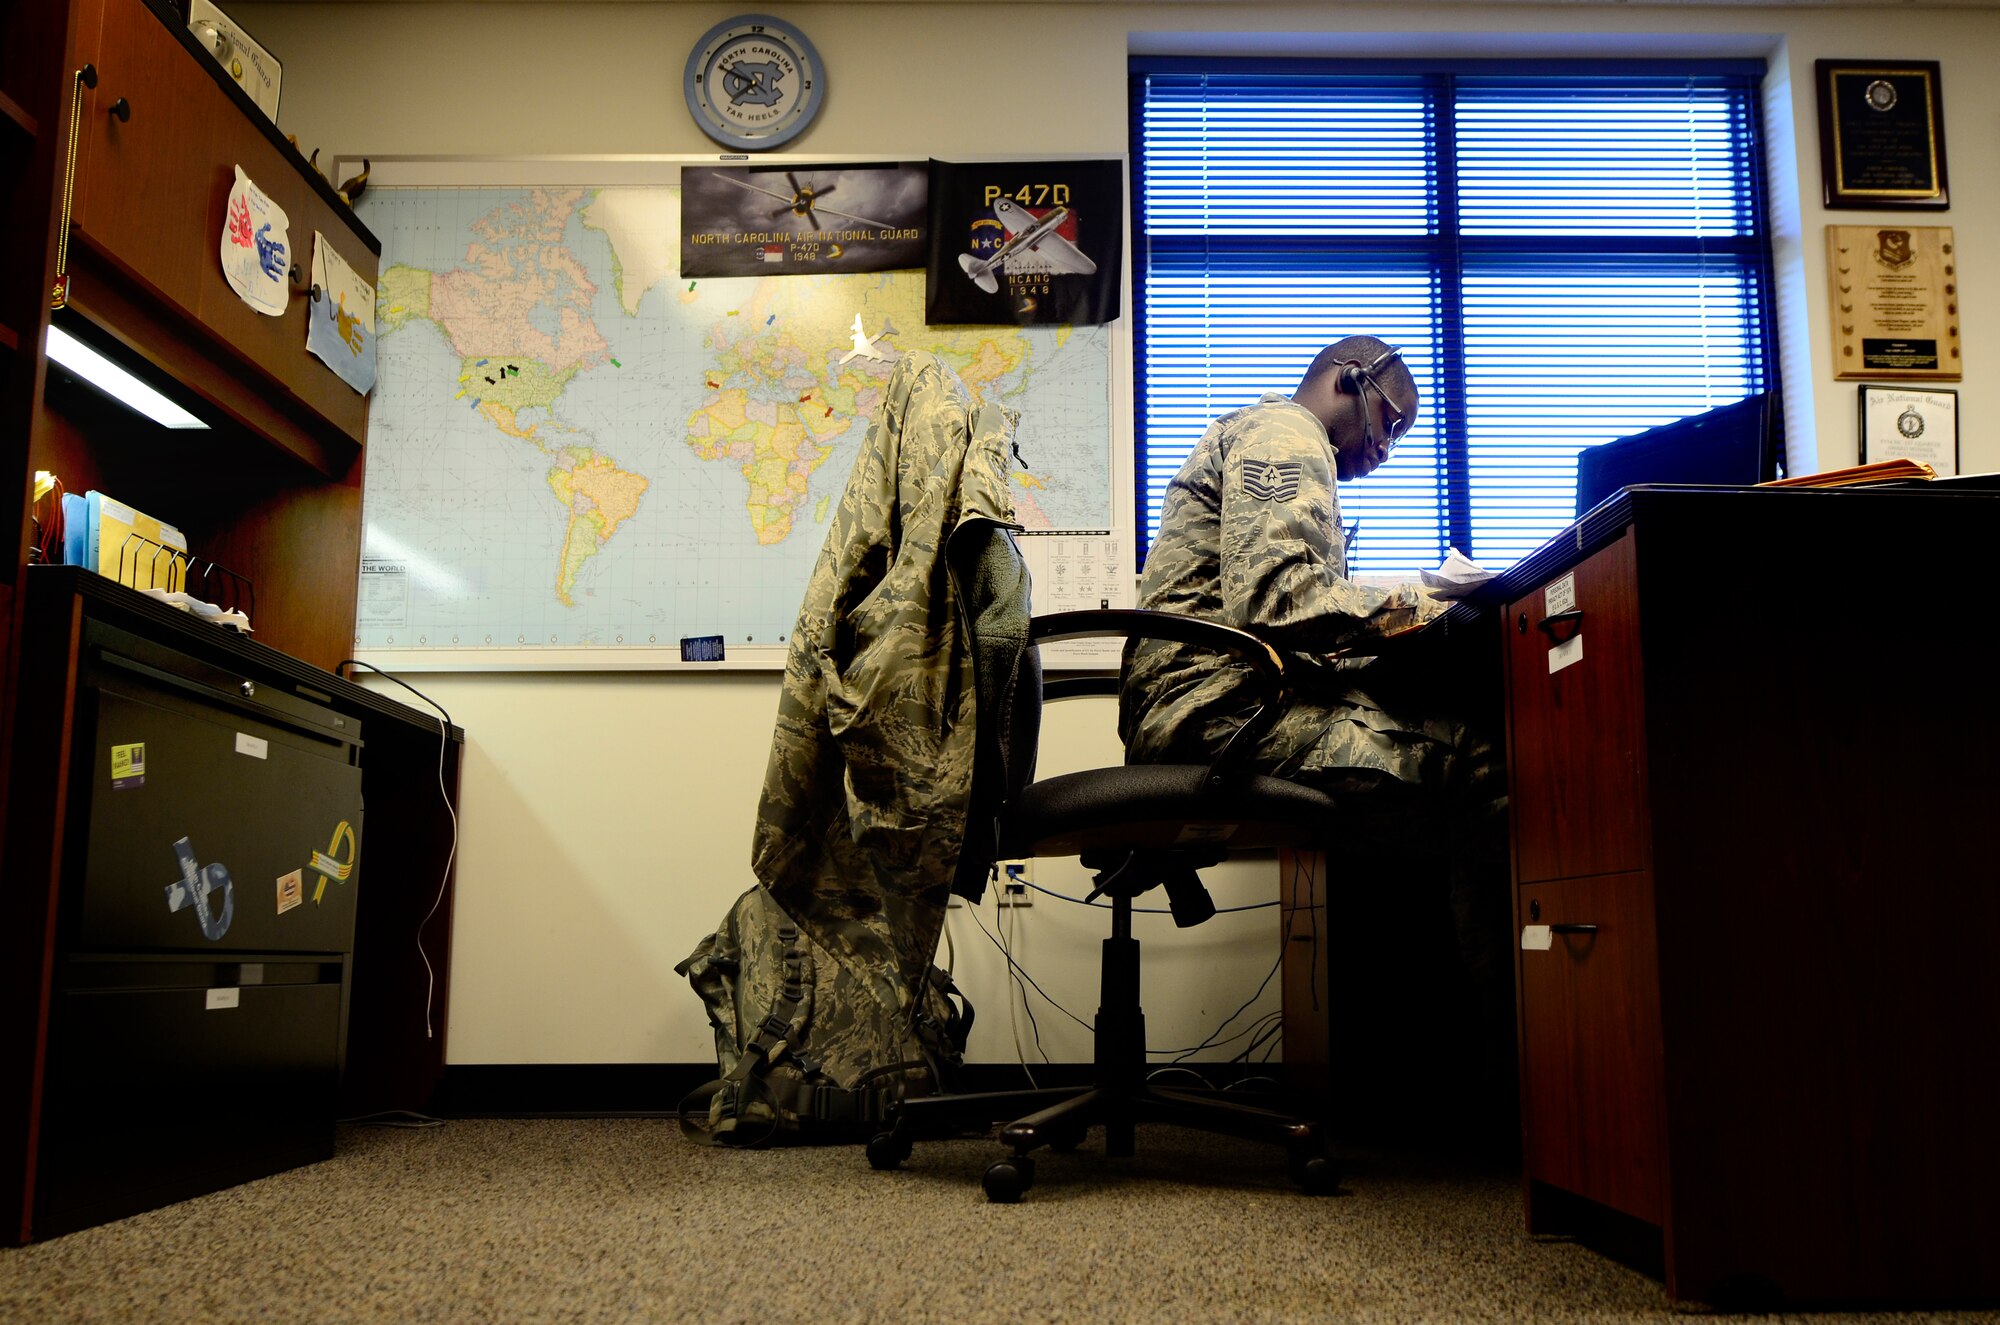 U.S. Air Force Tech. Sgt. Lonnie Brooks, 145th Force Support Squadron production recruiter, responds to e-mails and makes phone calls to potential applicants at the North Carolina Air National Guard base, Charlotte Douglas International Airport, N.C., June 16, 2015. At the age of 18, Brooks enlisted into the NCANG as an aircraft electrician then volunteered for a recruiter position which he has been in for the past six years. Recruiting is Brooks’ way to give back to the Air Force. (U.S. Air National Guard photo by Staff Sgt. Julianne M. Showalter, 145th Public Affairs/Released)